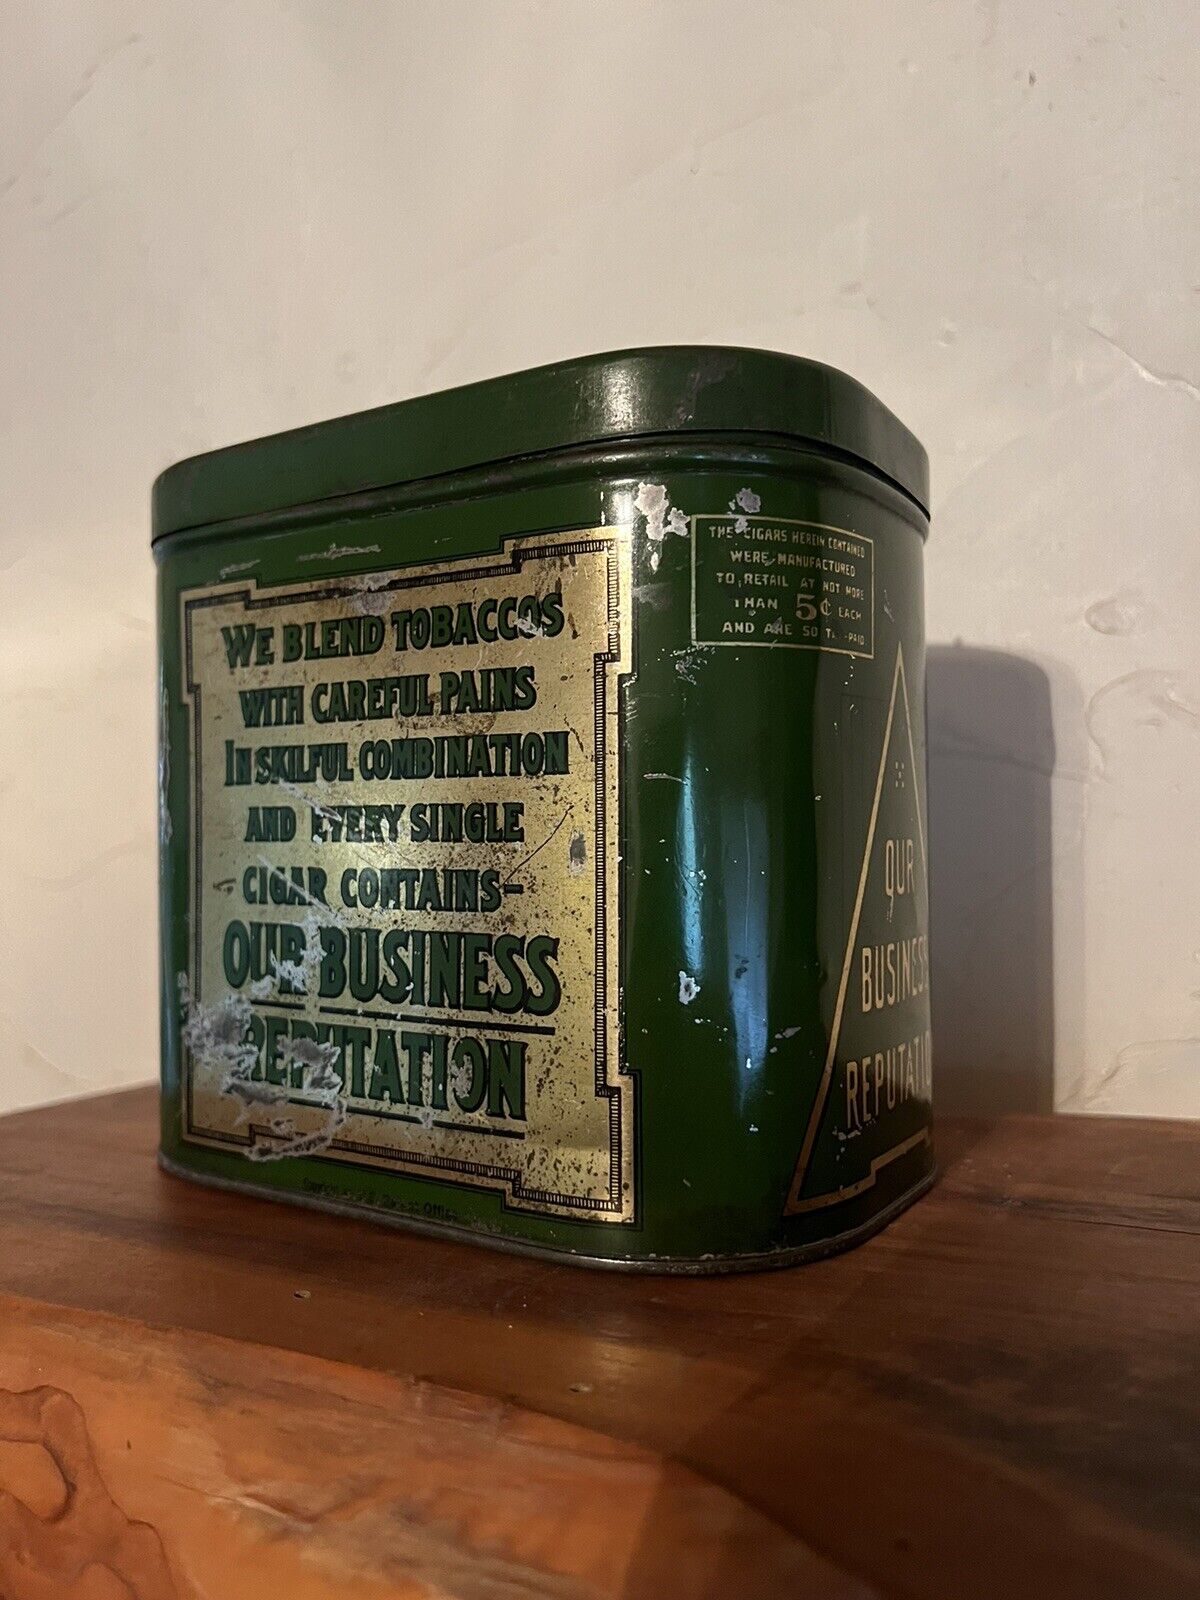 Vintage Our Business Reputation Cigar Tin Great Shape (empty)